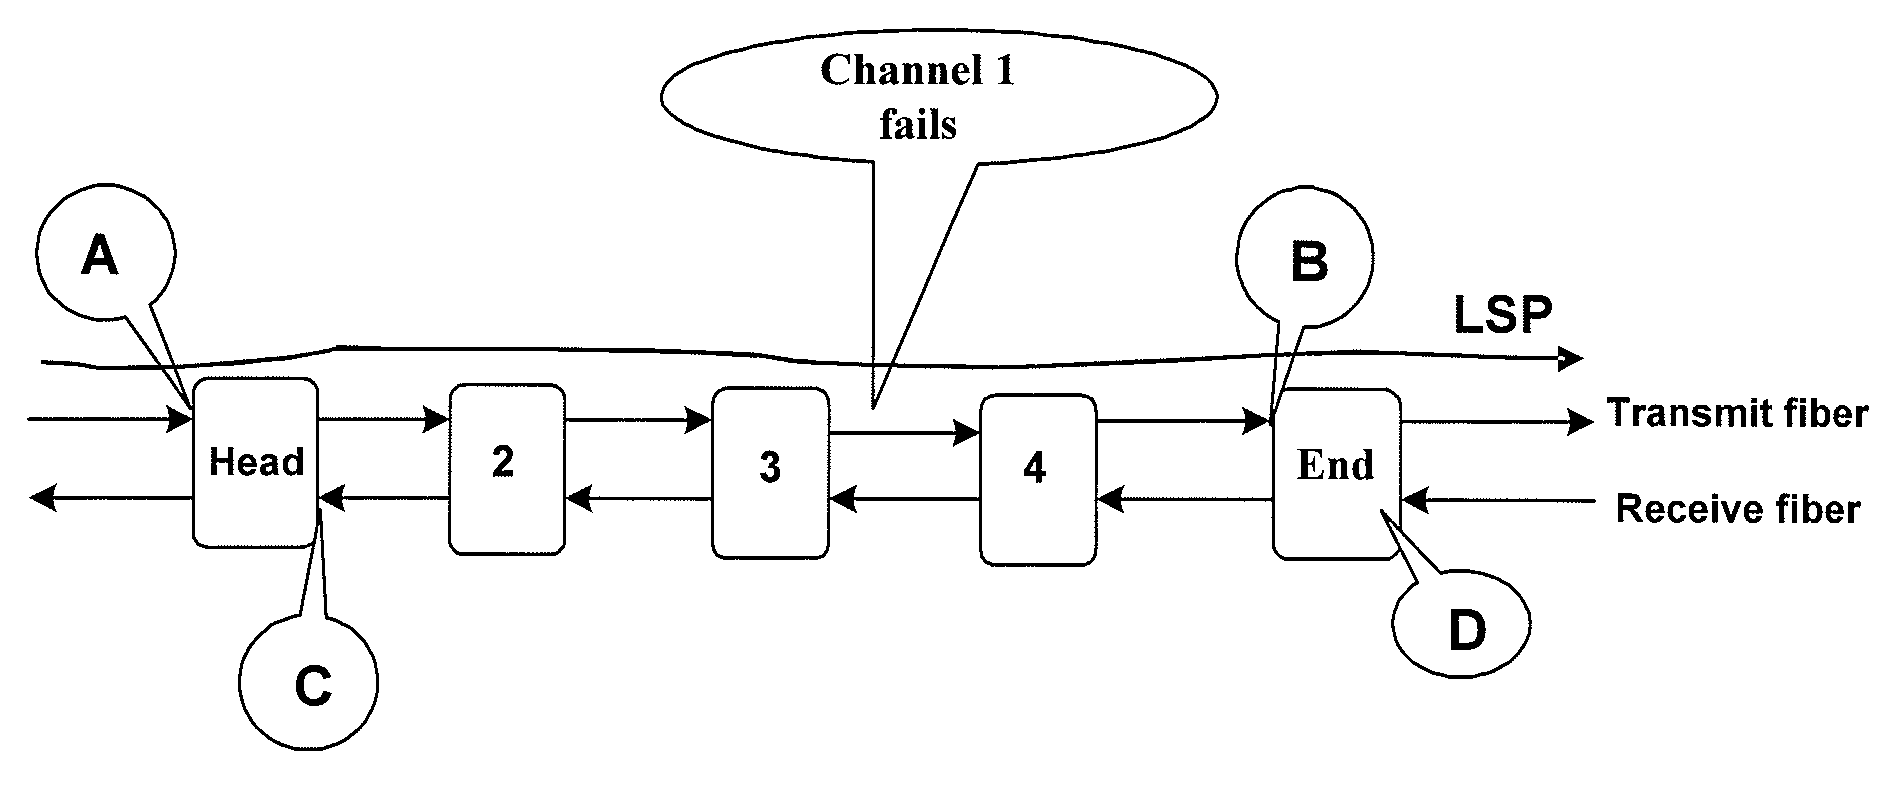 Method for handling channel failures in an automatically switched optical network